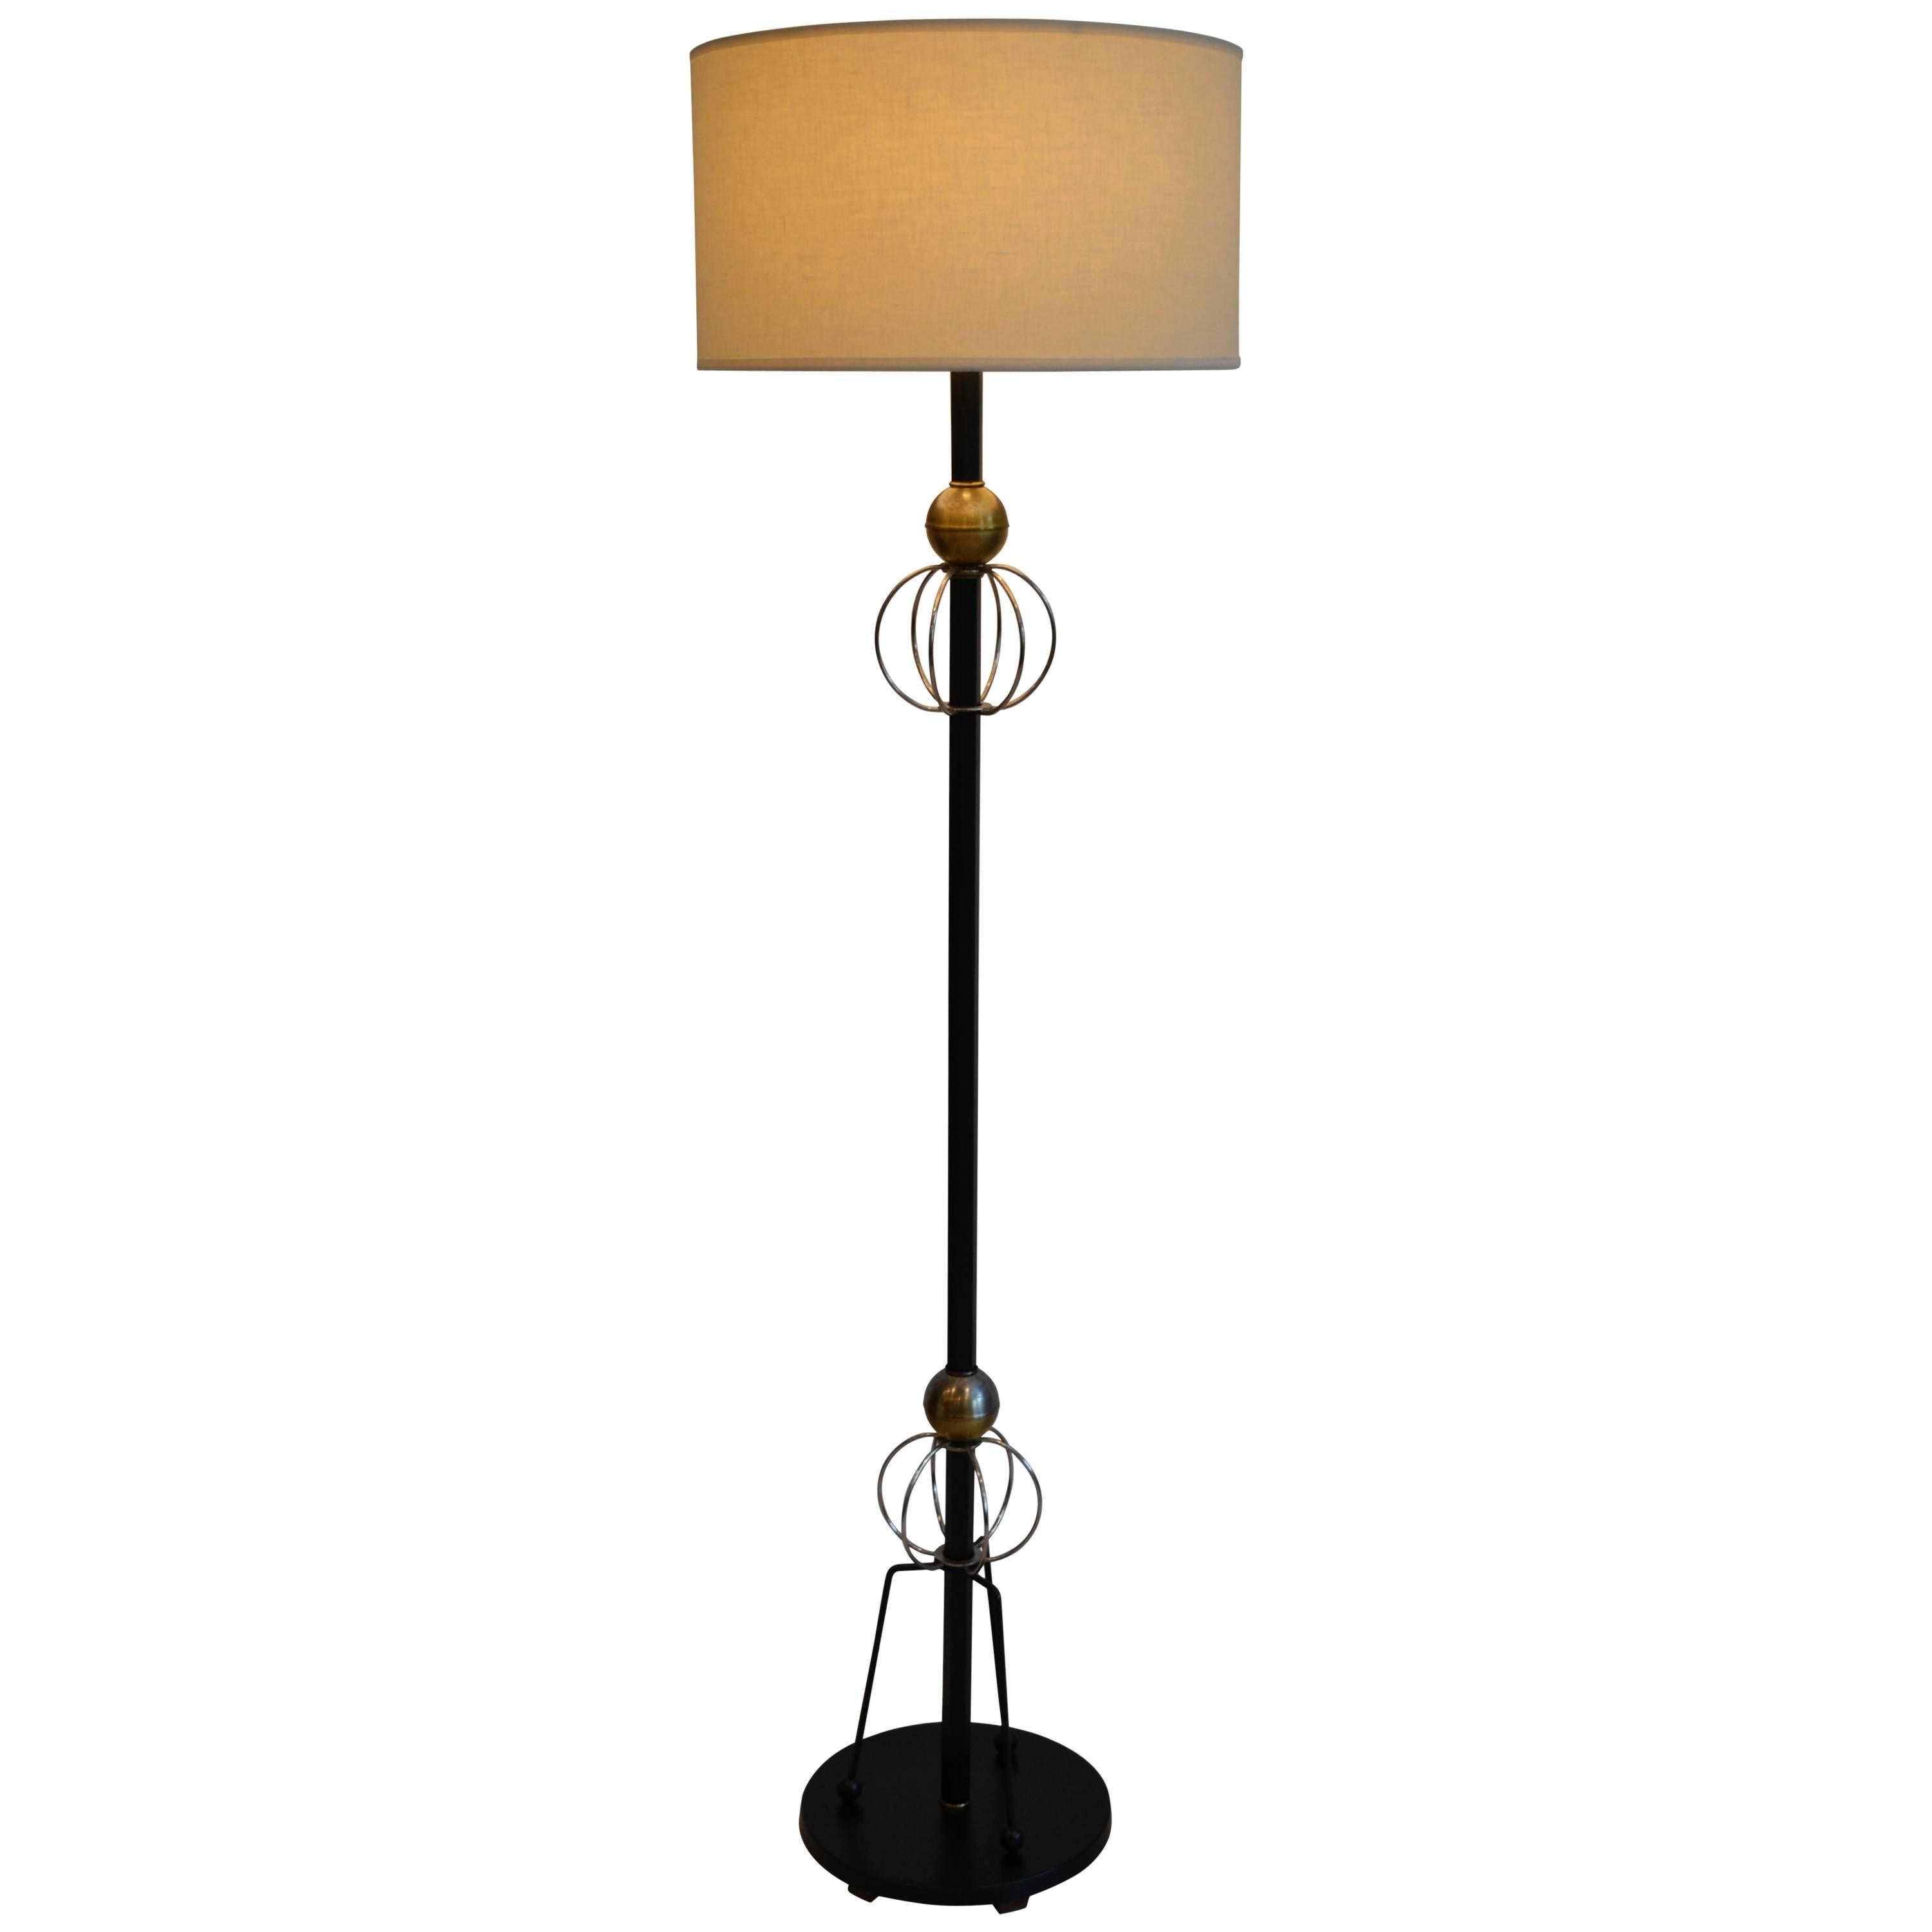 Mid Century Modern Atomic Age Floor Lamp in the Style of Gerald Thurston, 1950's For Sale